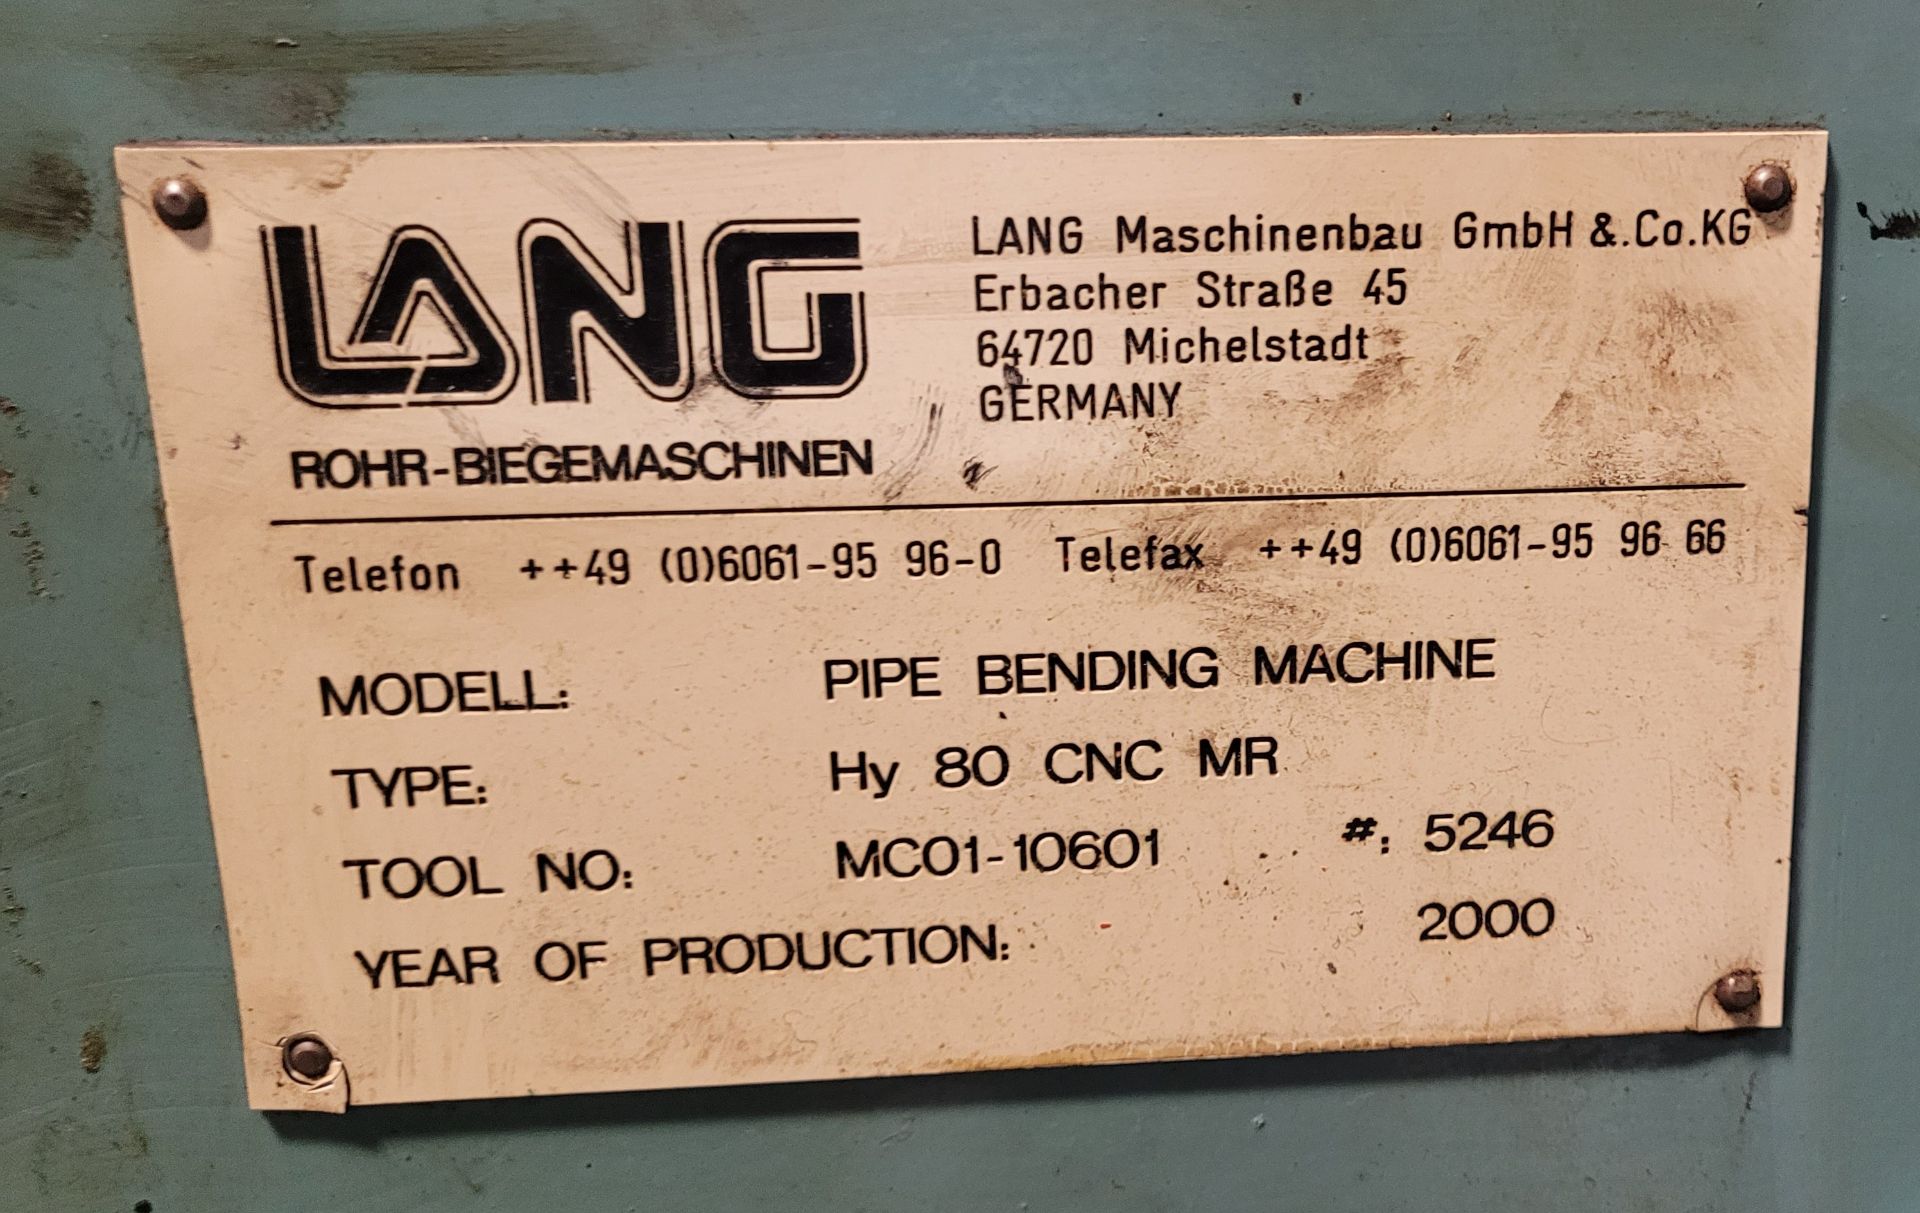 LANG HYDRAULIC TUBE BENDER MODEL HY 80 CNC MR (AS-IS & READY FOR REBUILDING) C/W ASST PARTS, DIES, - Image 13 of 13